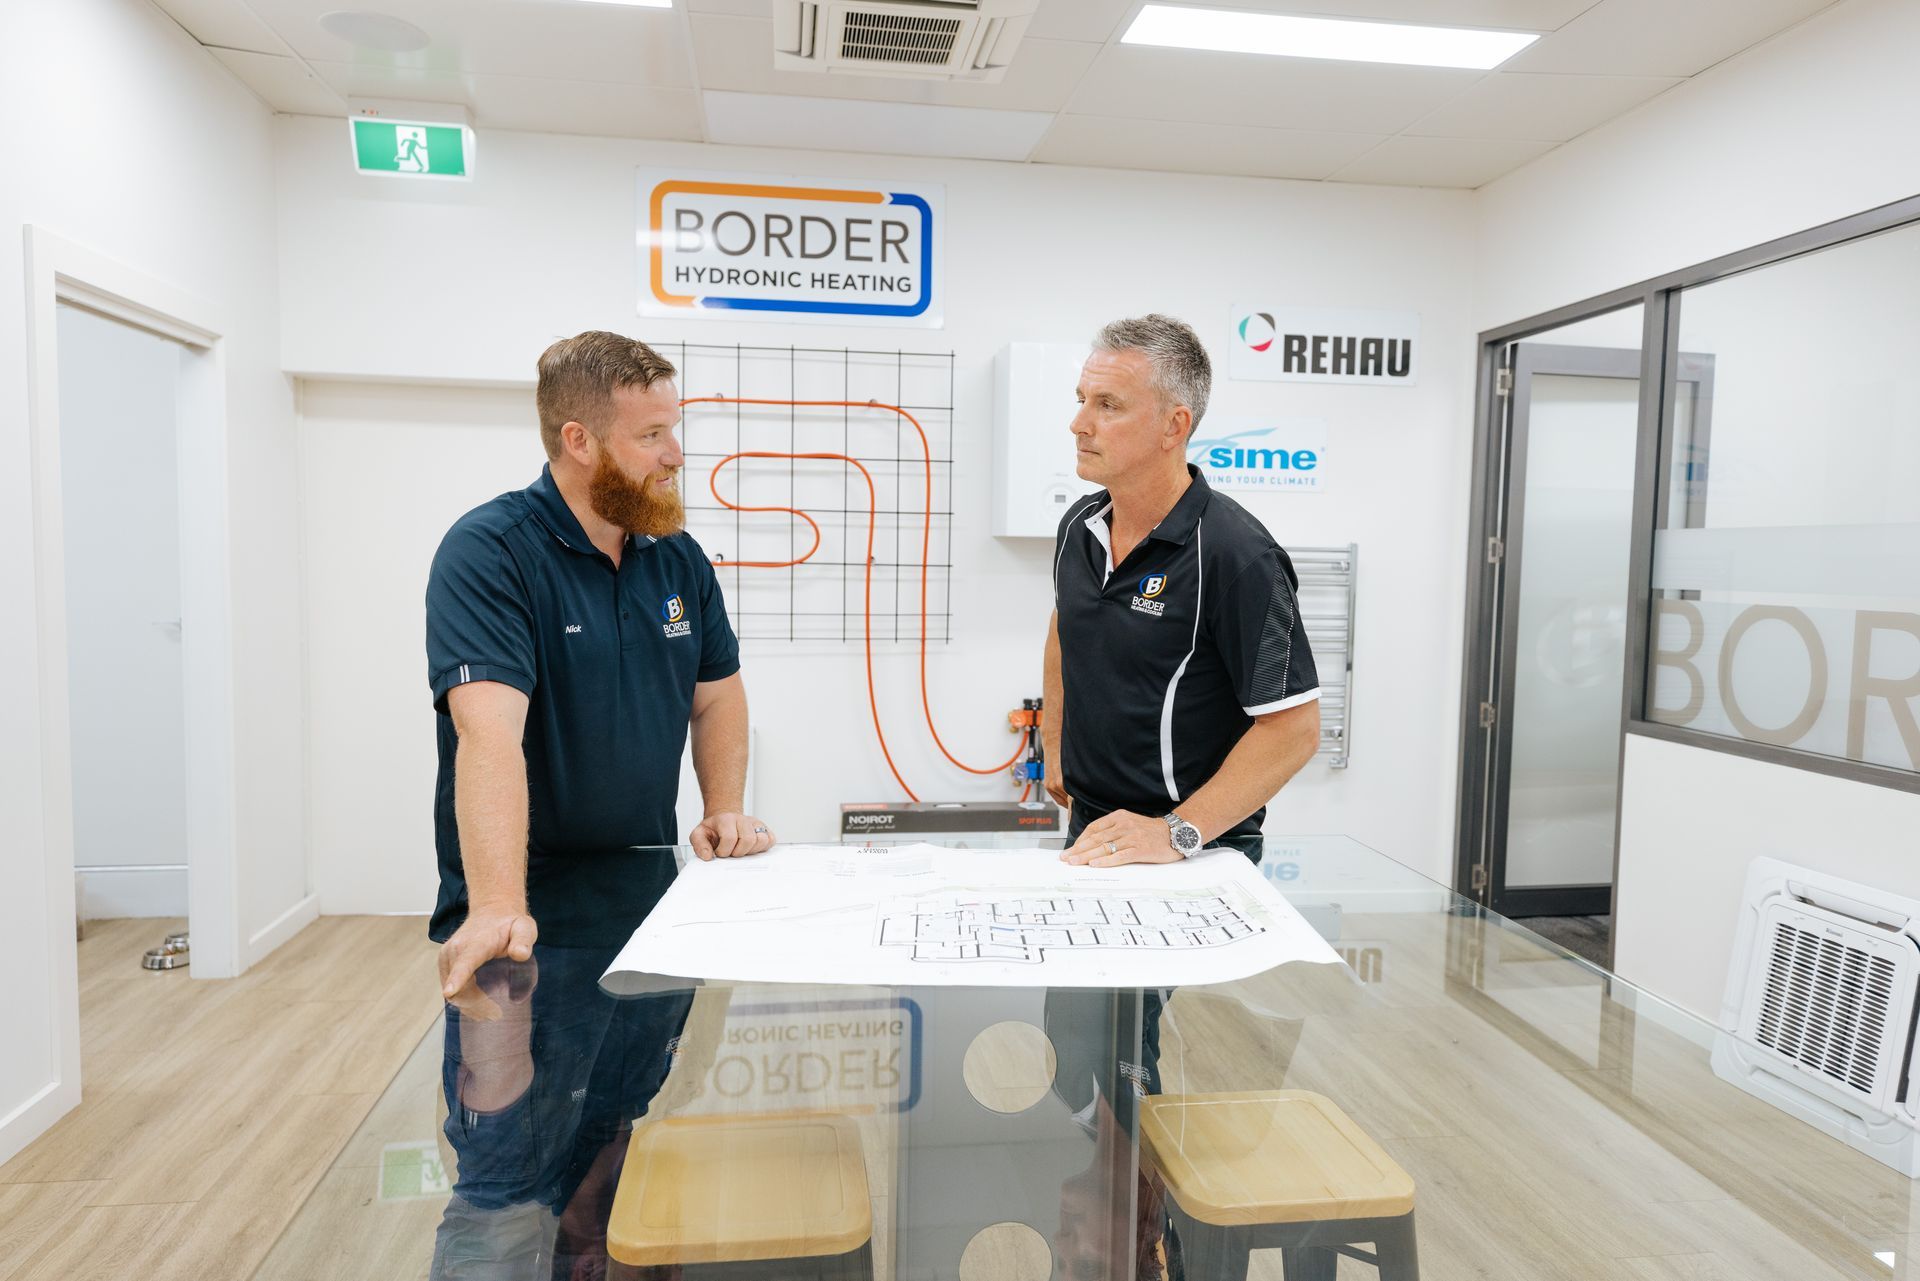 Border heating & cooling installation team discussing plans